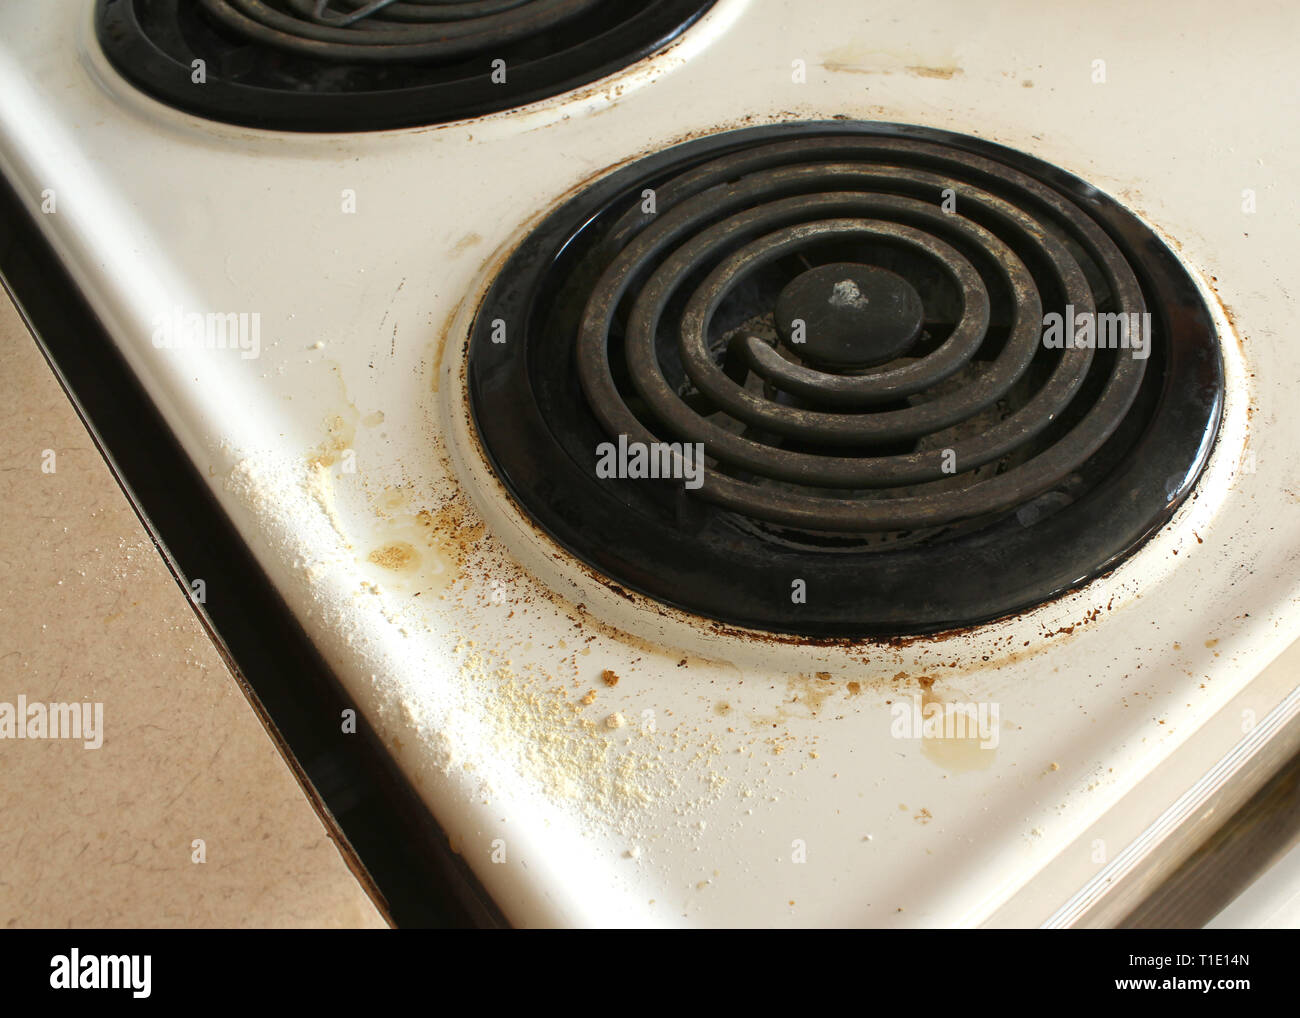 https://c8.alamy.com/comp/T1E14N/dirty-and-beat-up-coil-stove-top-T1E14N.jpg